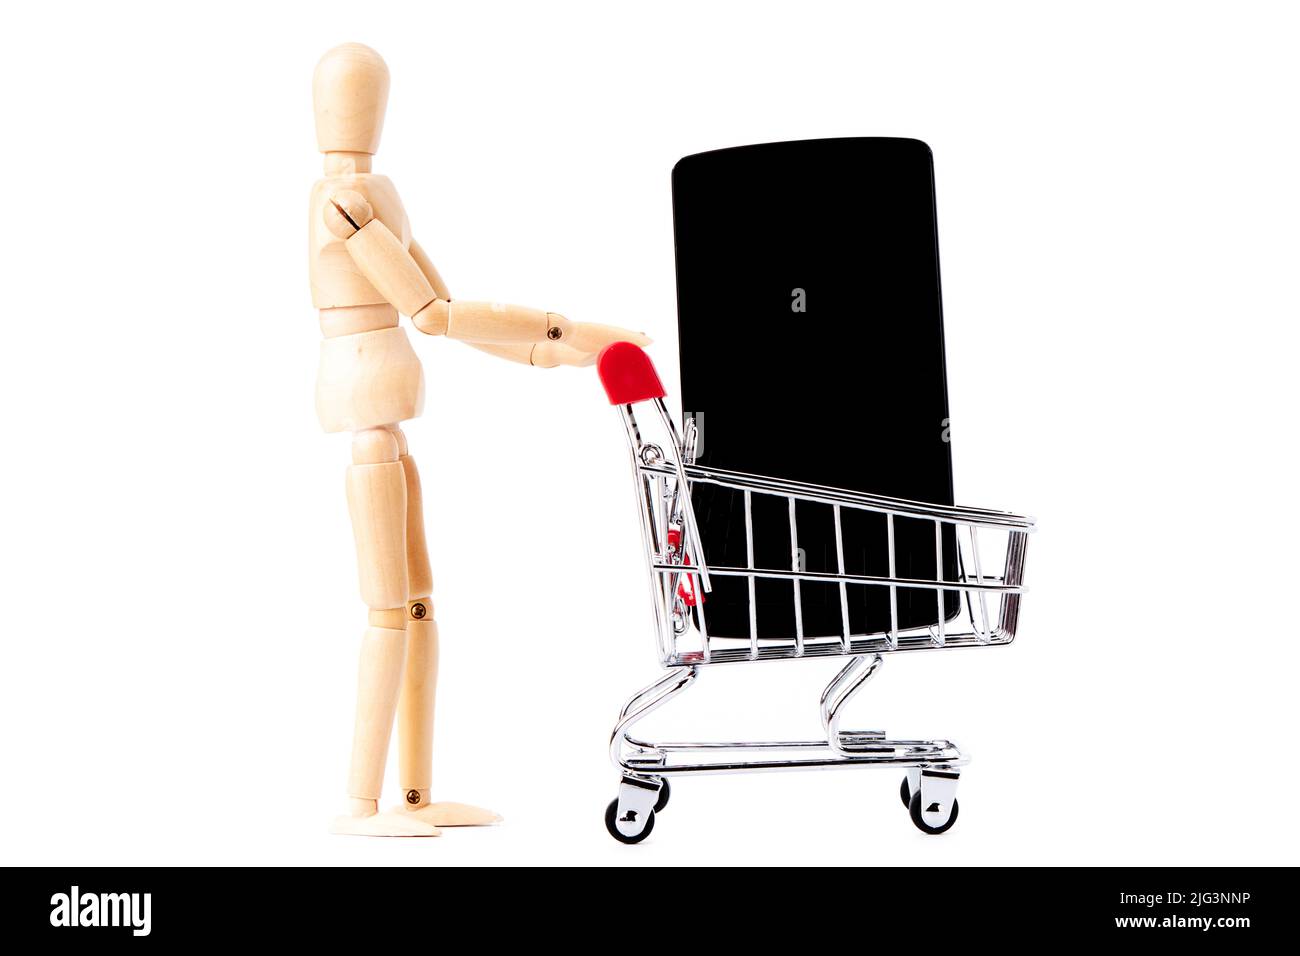 Mobile with broken screen inside a shopping cart pushed by a dummy. Insurance concept. Repair concept Stock Photo